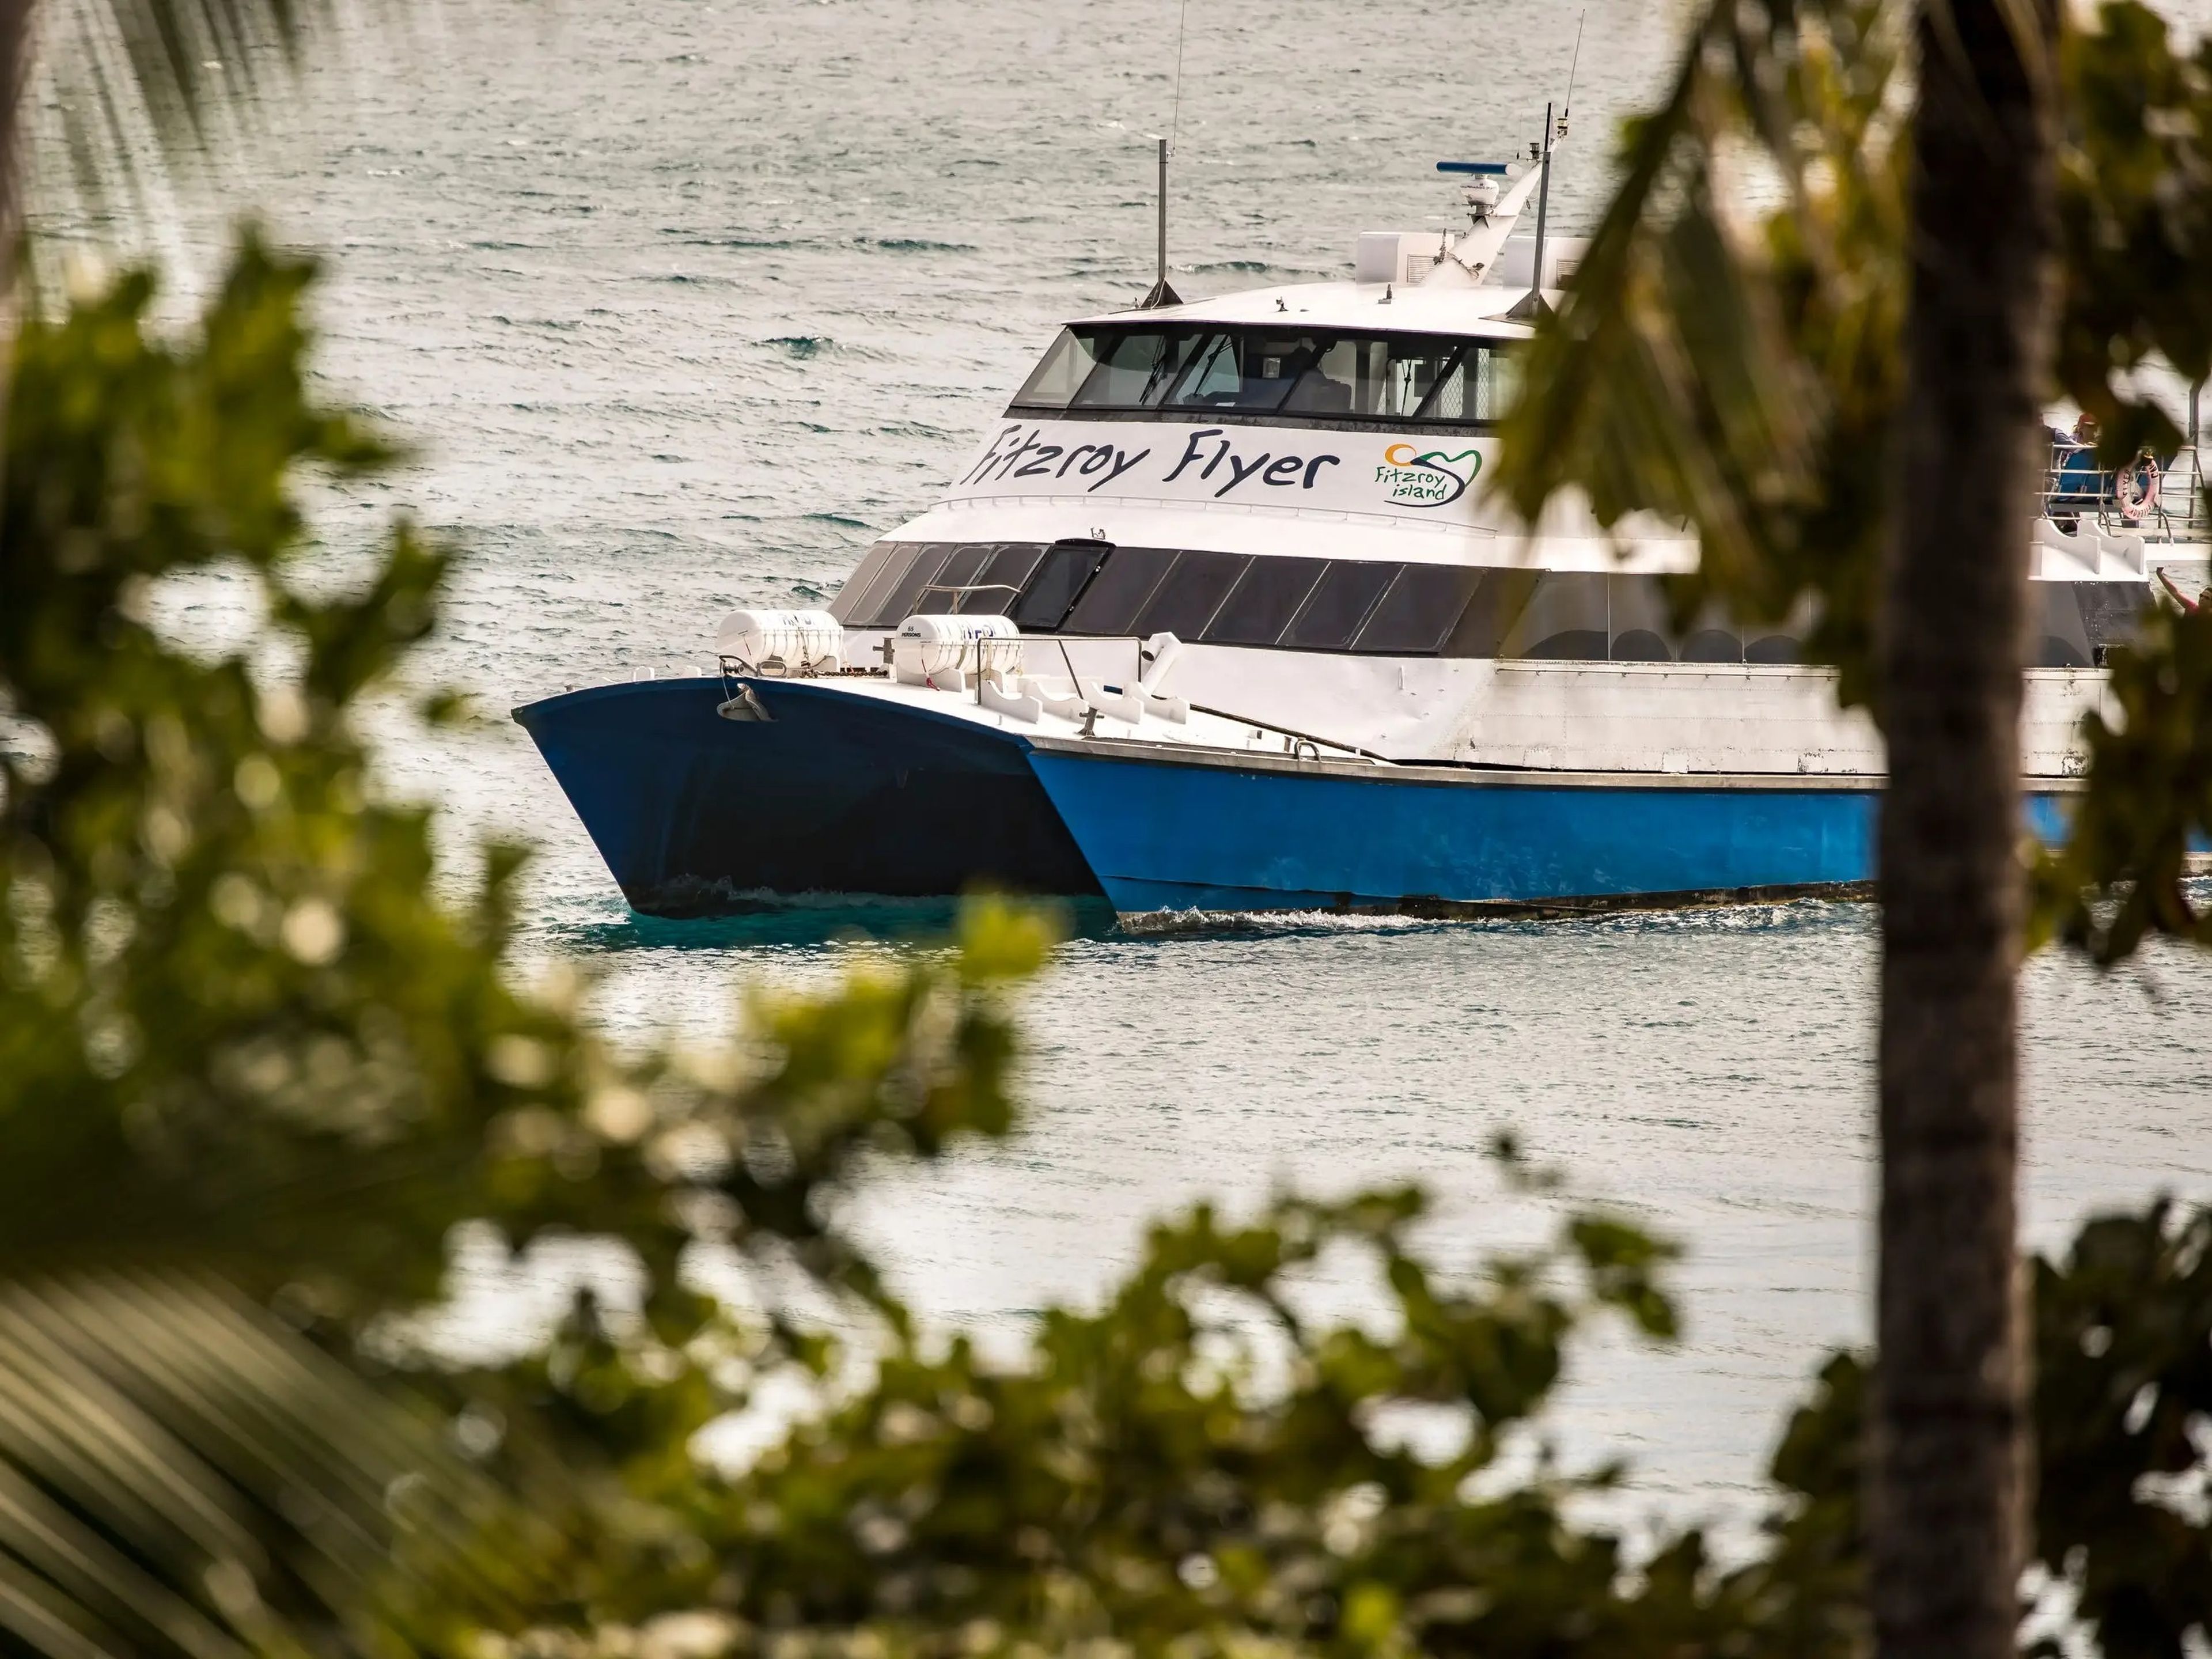 A boat called the Fitzroy Flyer is seen in the water through the trees.